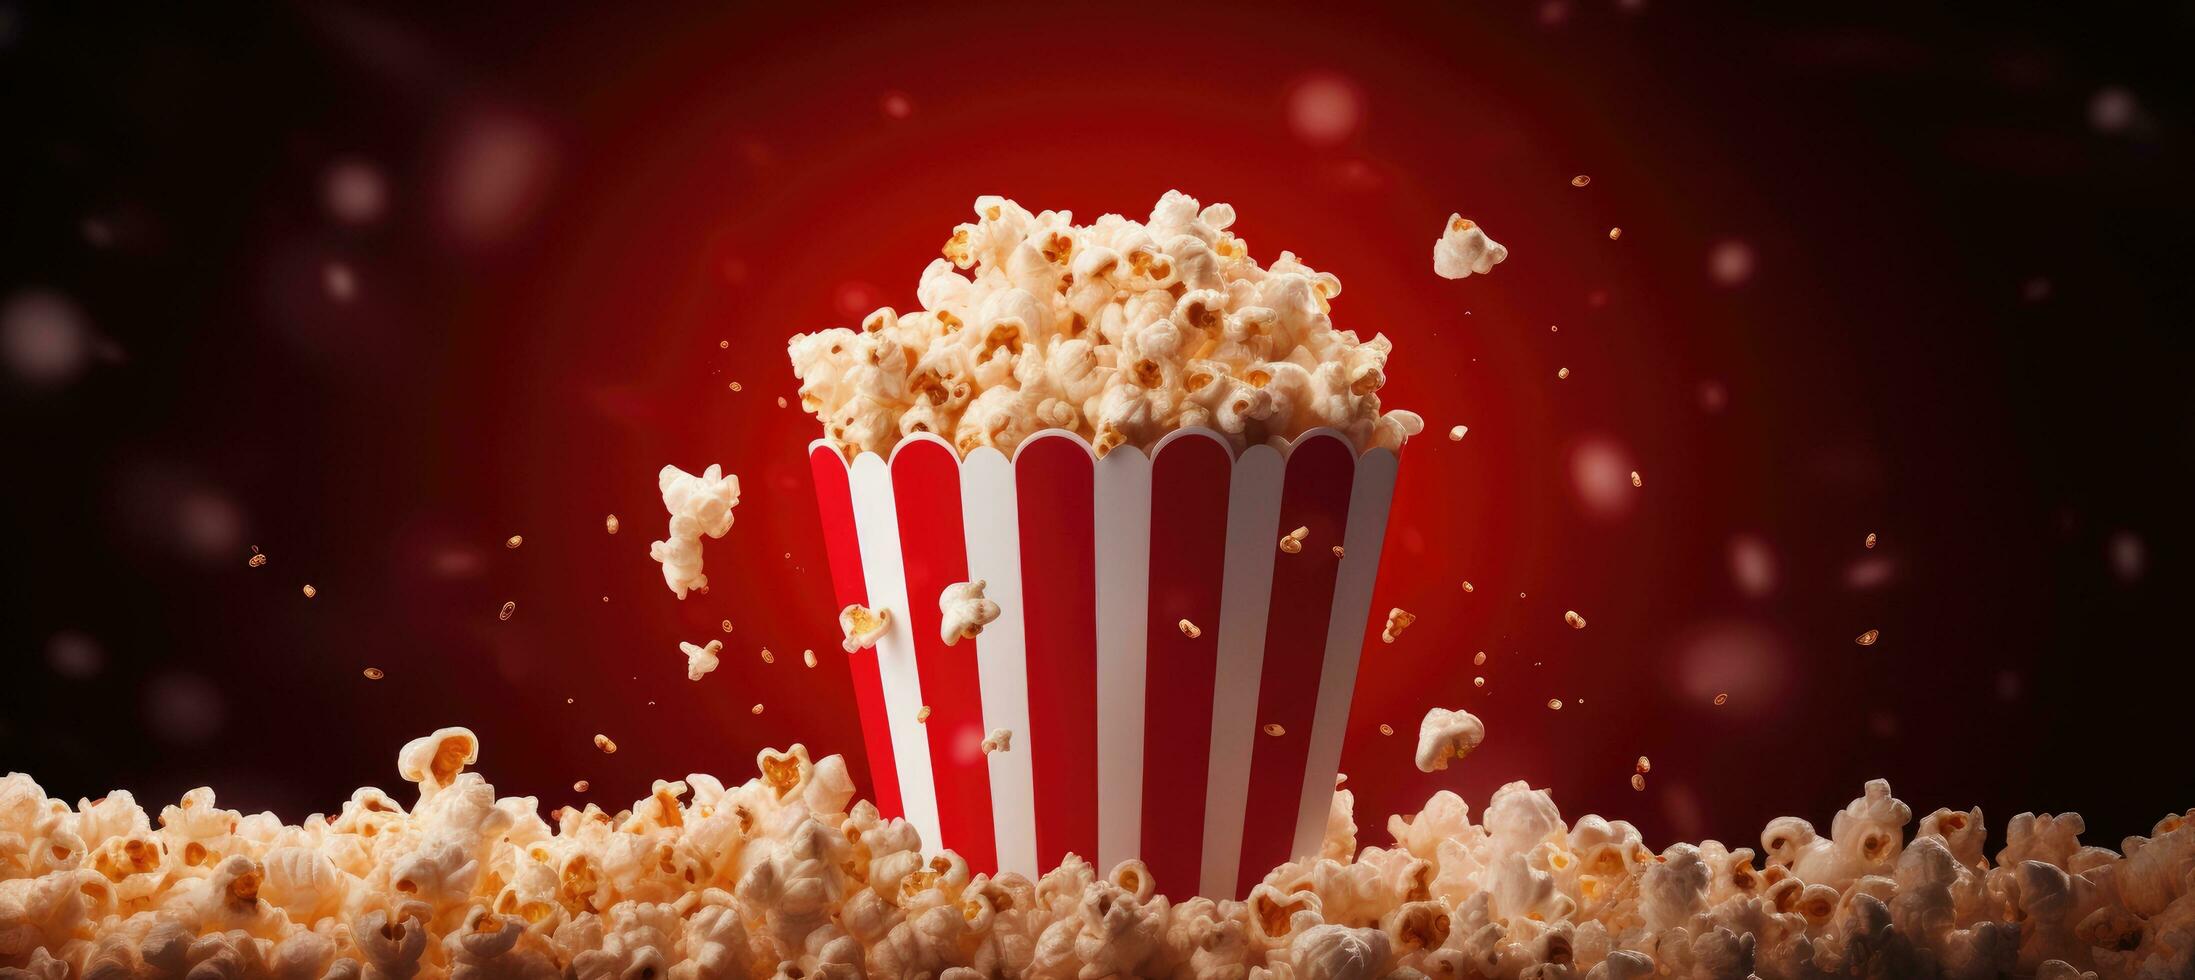 AI generated popcorn in a red box photo